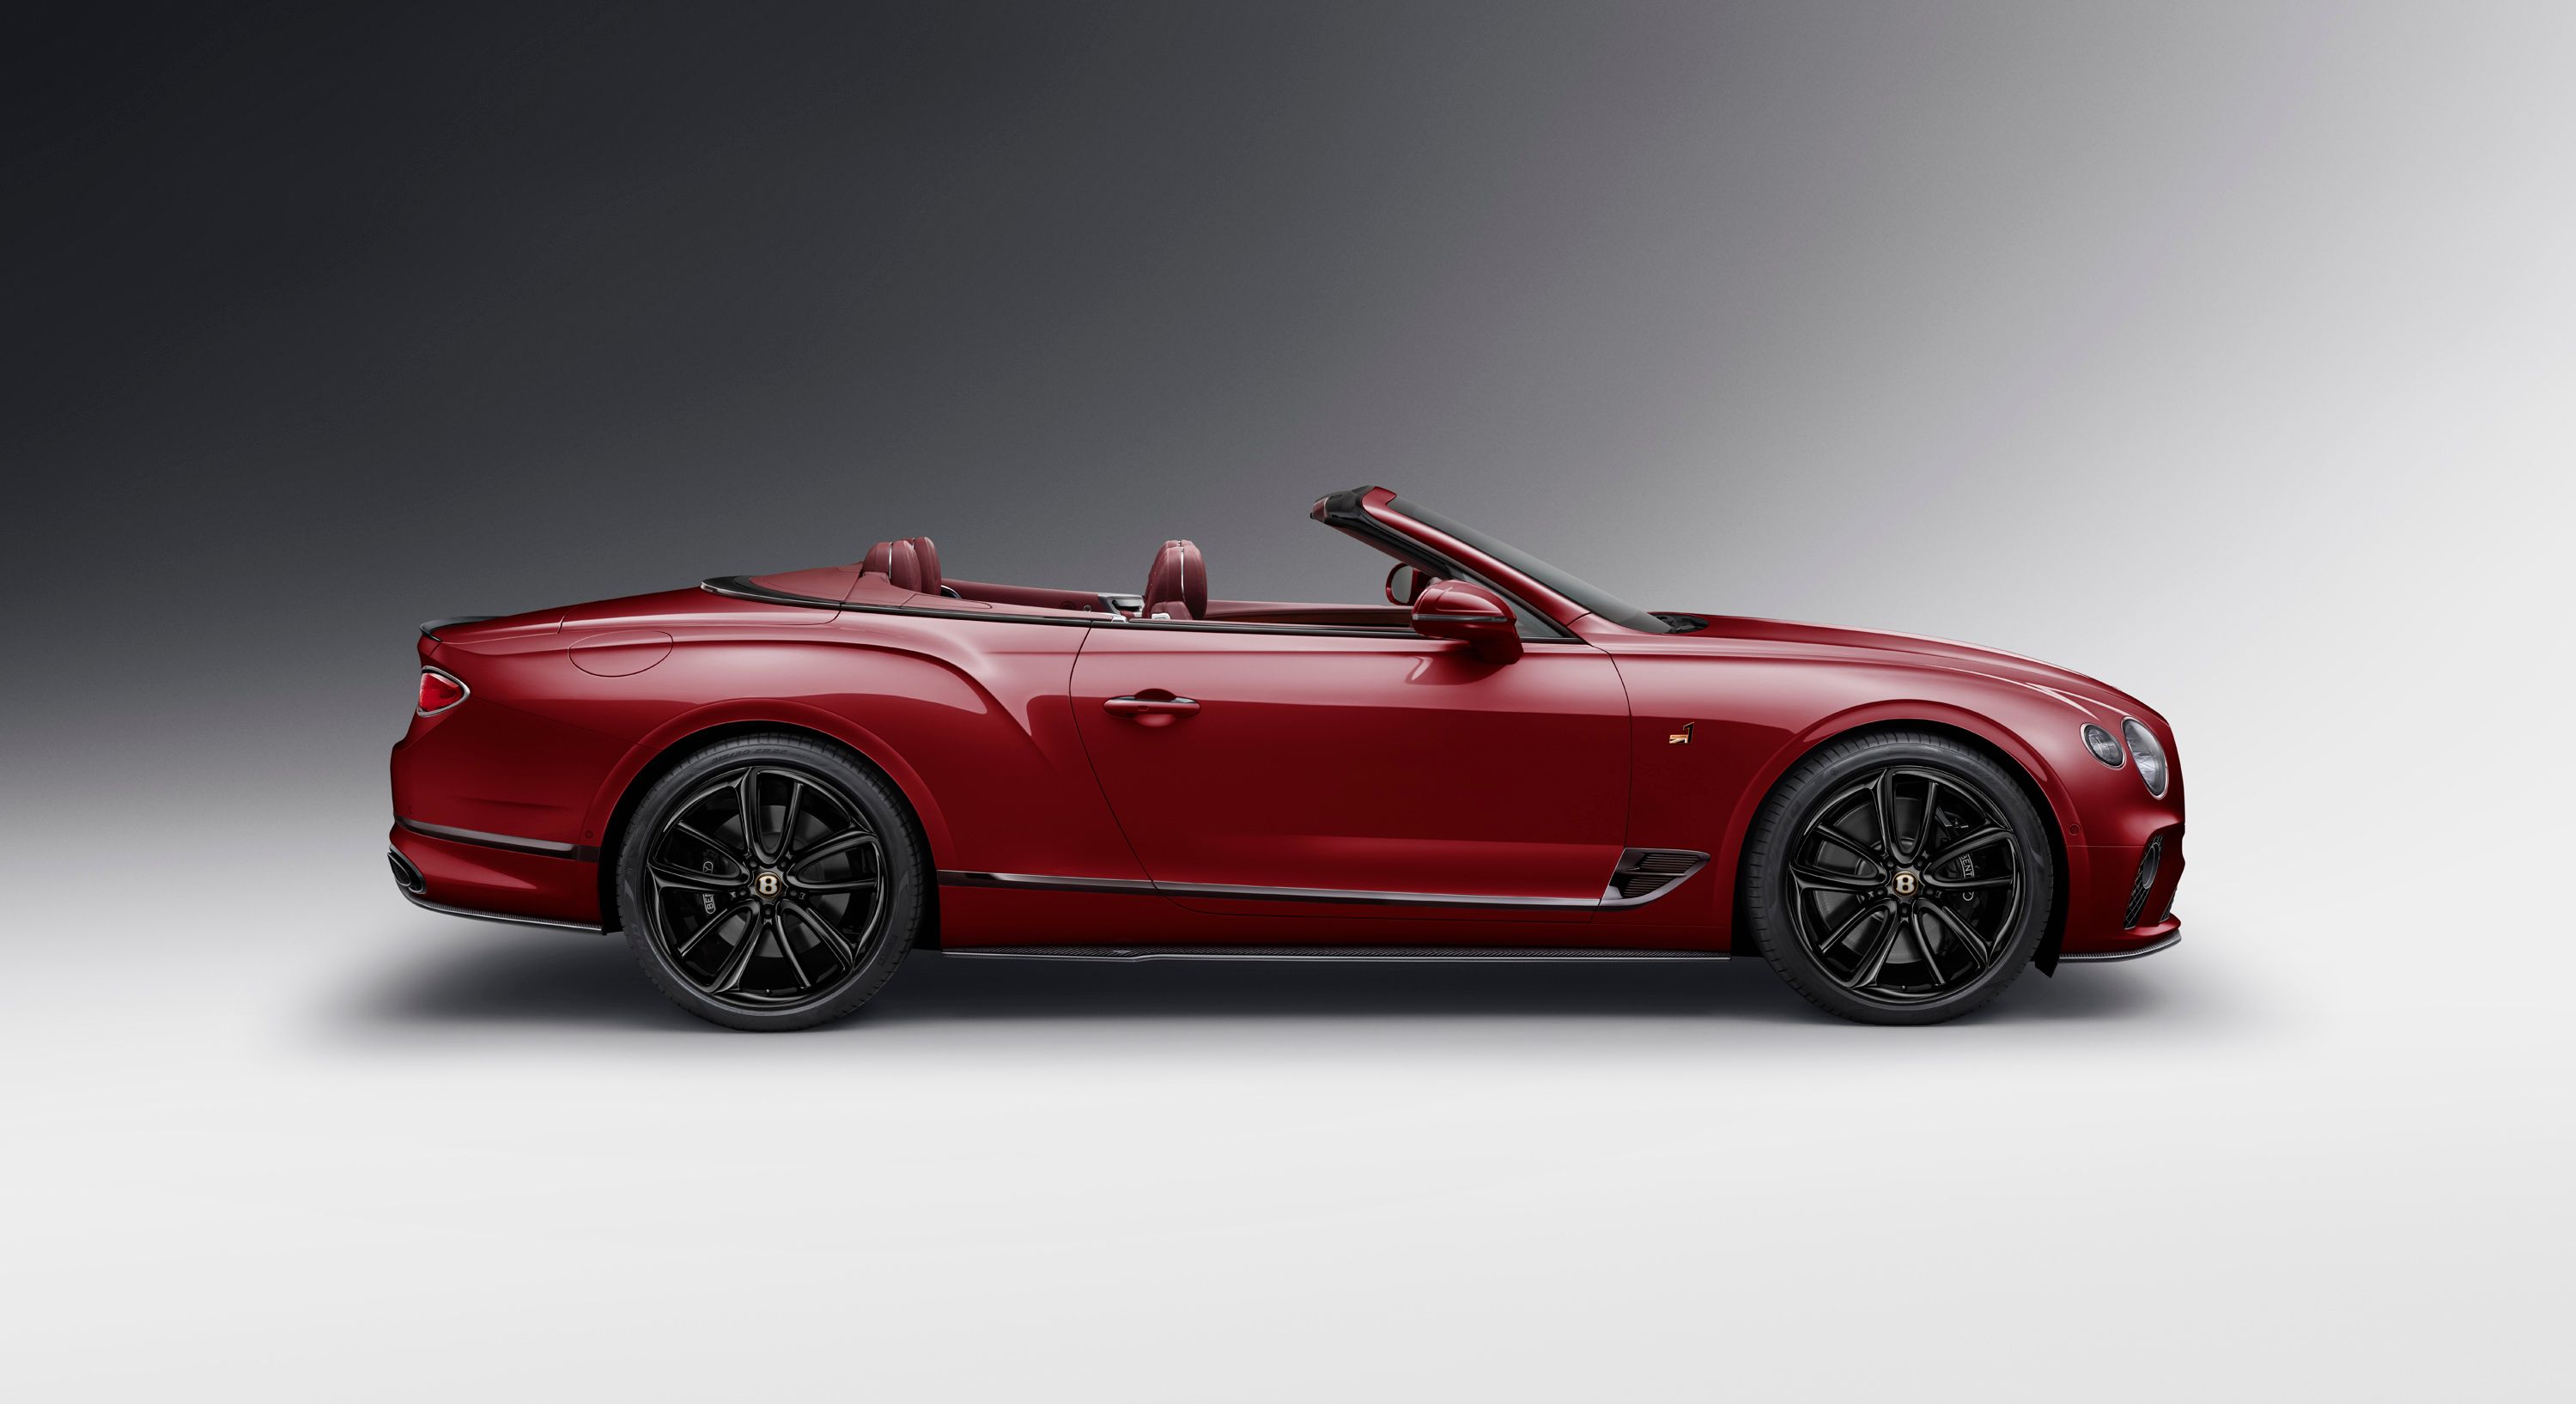 2019 Bentley Continental GT Convertible Number 1 Edition